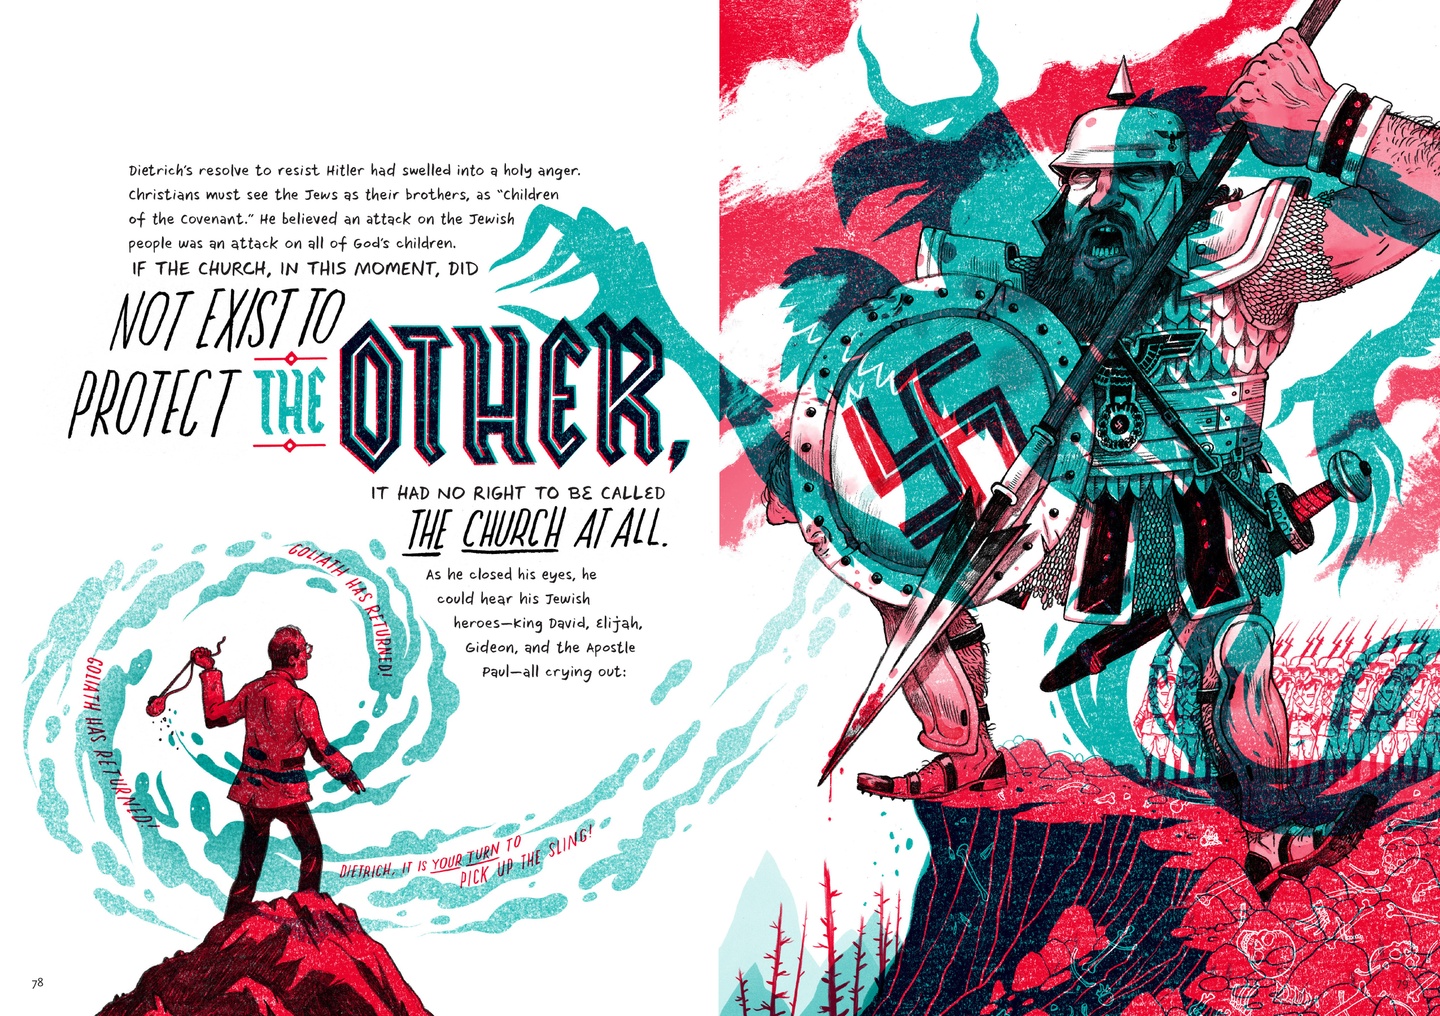 A spread, drawn in vibrant teal and red-pink hues, with black text: a towering figure standing on a cliff on the right with a long, blood-stained spear in their left hand, a shield with Nazi insignia in their right. To the left is a smaller figure standing on a hilltop, willing a sling in their left hand. Shadows from the giant extend their talons out towards the paragraph on the left hand page, which reads: 'Dietrich's resolve to resist Hitler had swelled into a holy anger. Christians must see the Jews as their brothers, as "children of the covenant." He believed an attack on the Jewish people was an attack on the Jewish people was an attack on all of God's children. IF THE CHURCH, IN THIS MOMENT, DID NOT EXIST TO PROTECT THE OTHER, IT HAD NO RIGHT TO BE CALLED THE CHURCH AT ALL. As he closed his eyes, he could hear his Jewish heroes—King David, Elijah, Gideon, and the Apostle Paul—all crying out: "GOLIATH HAS RETURNED! GOLIATH HAS RETURNED! DIETRICH, IT IS YOUR TURN TO PICK UP THE SLING!"